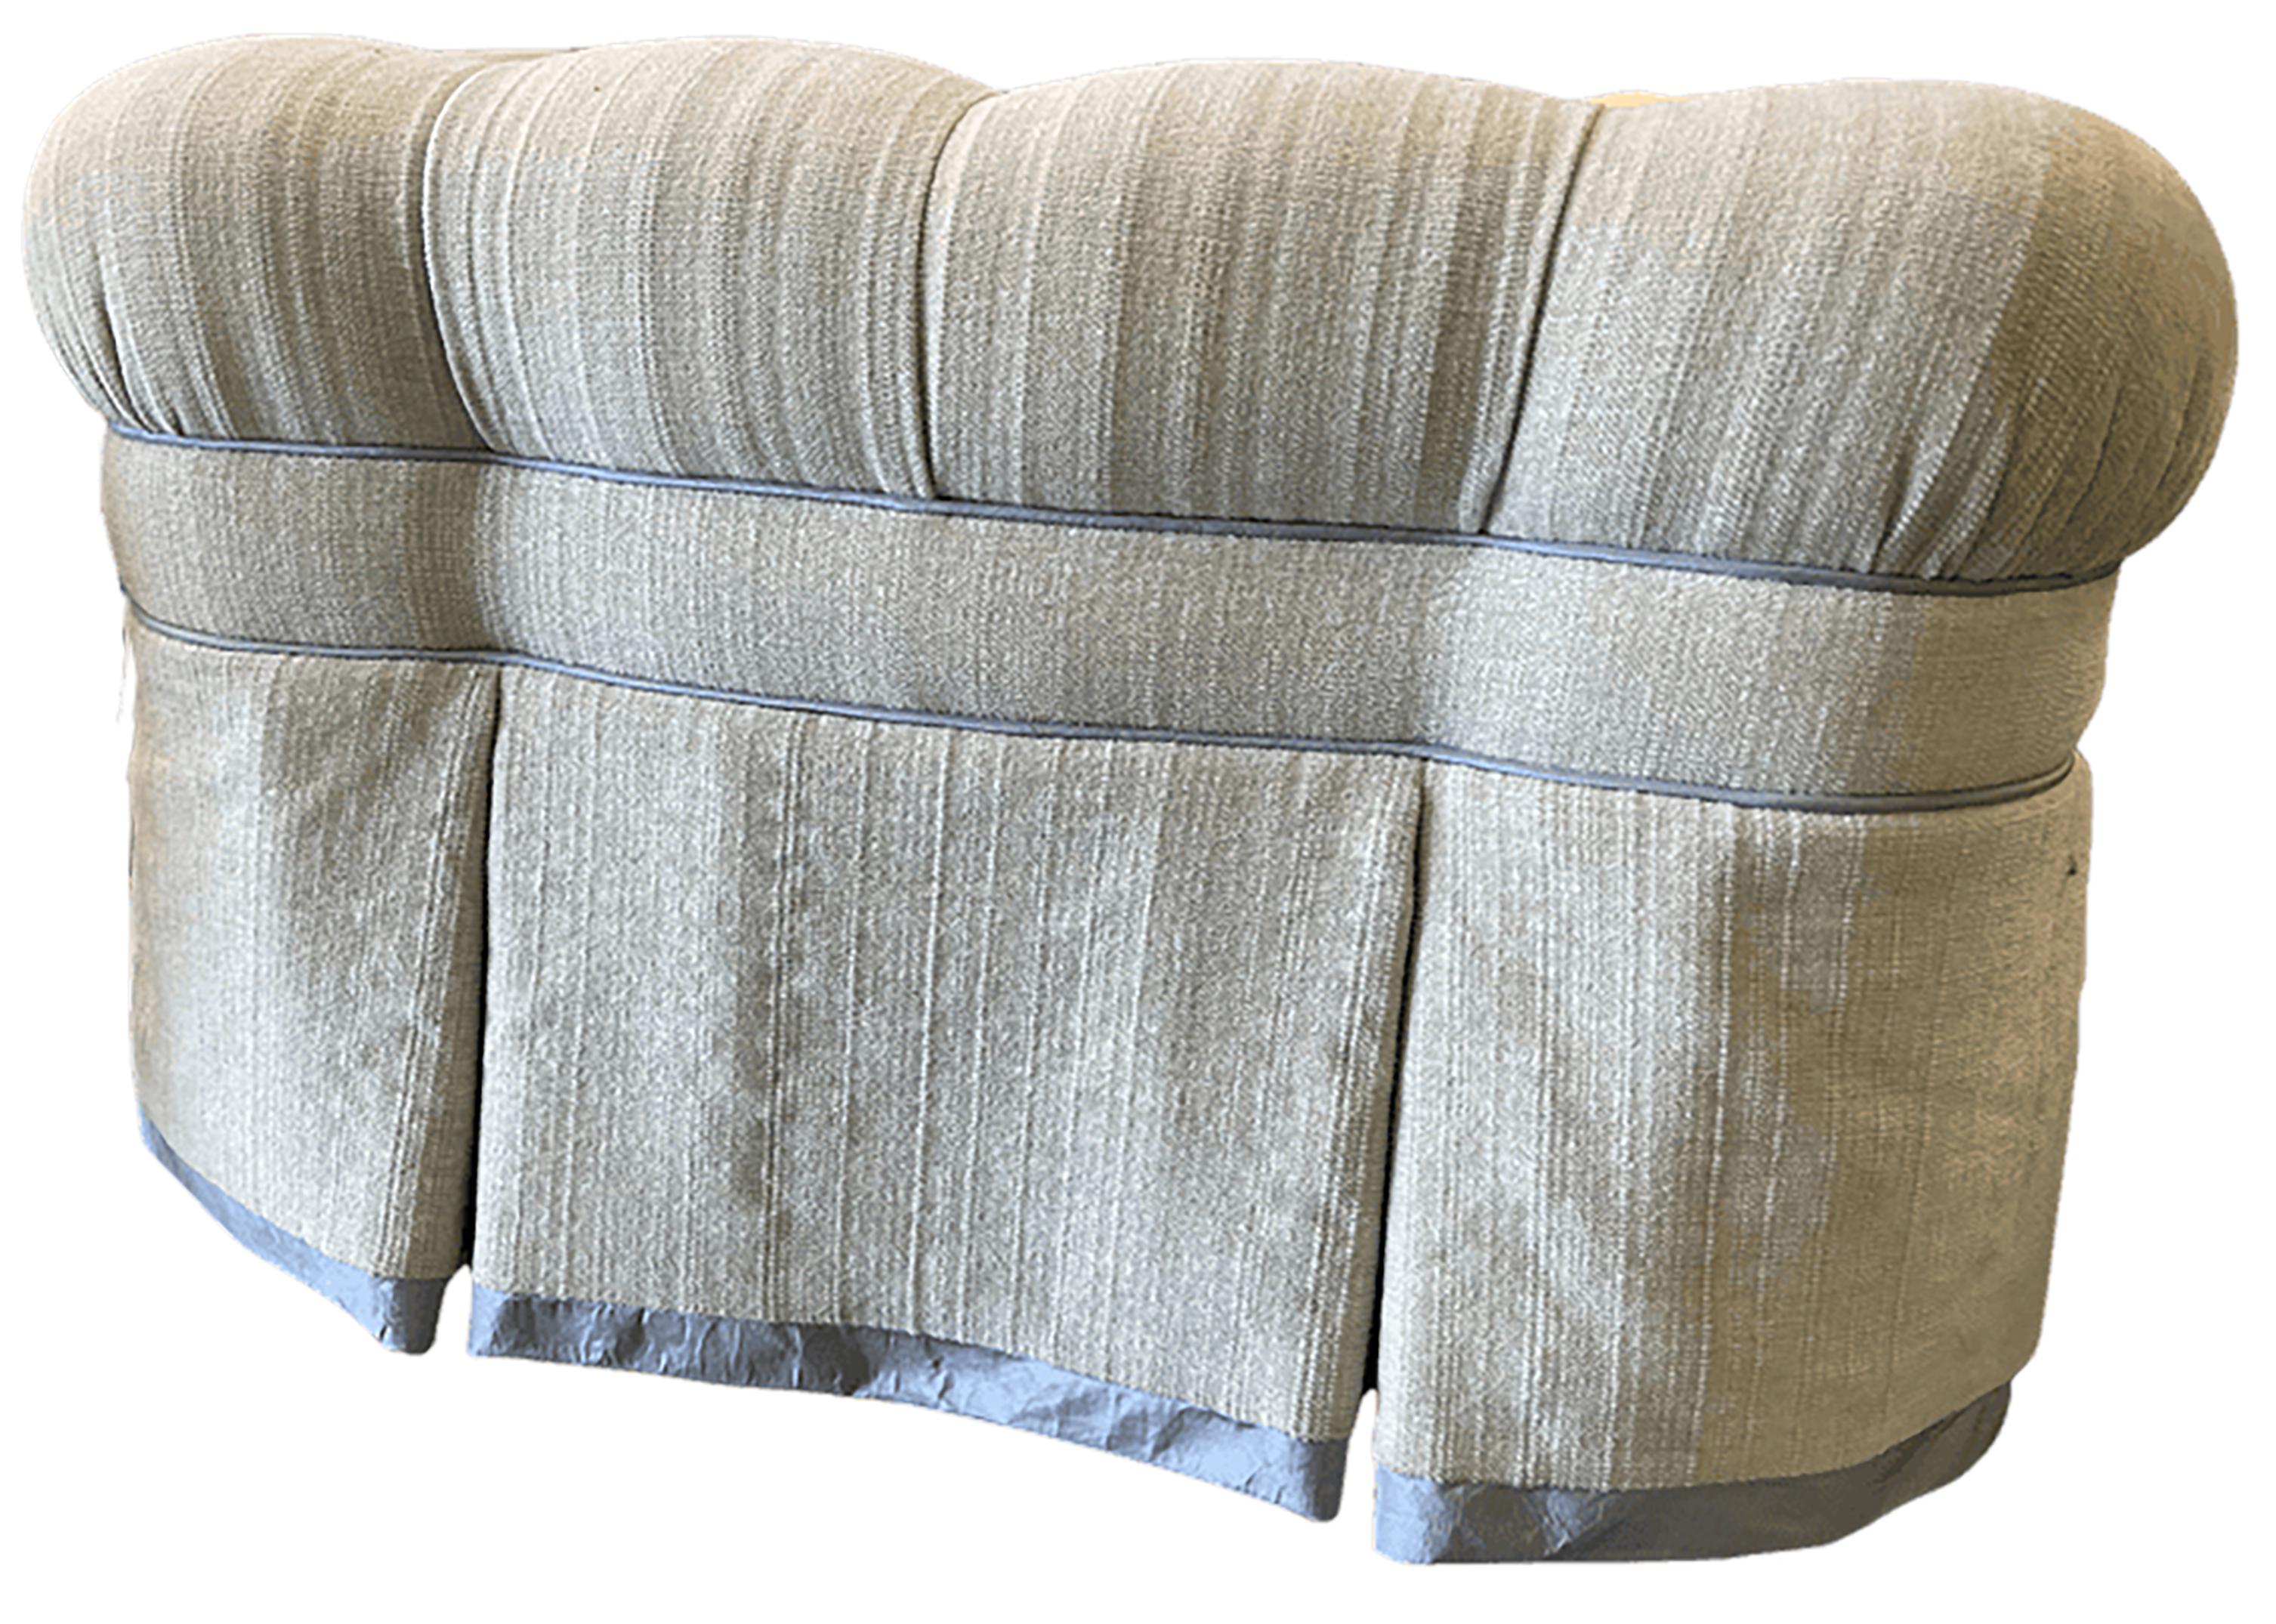 Tufted Ottoman with Off-White Layered Fabric In Good Condition For Sale In Dallas, TX